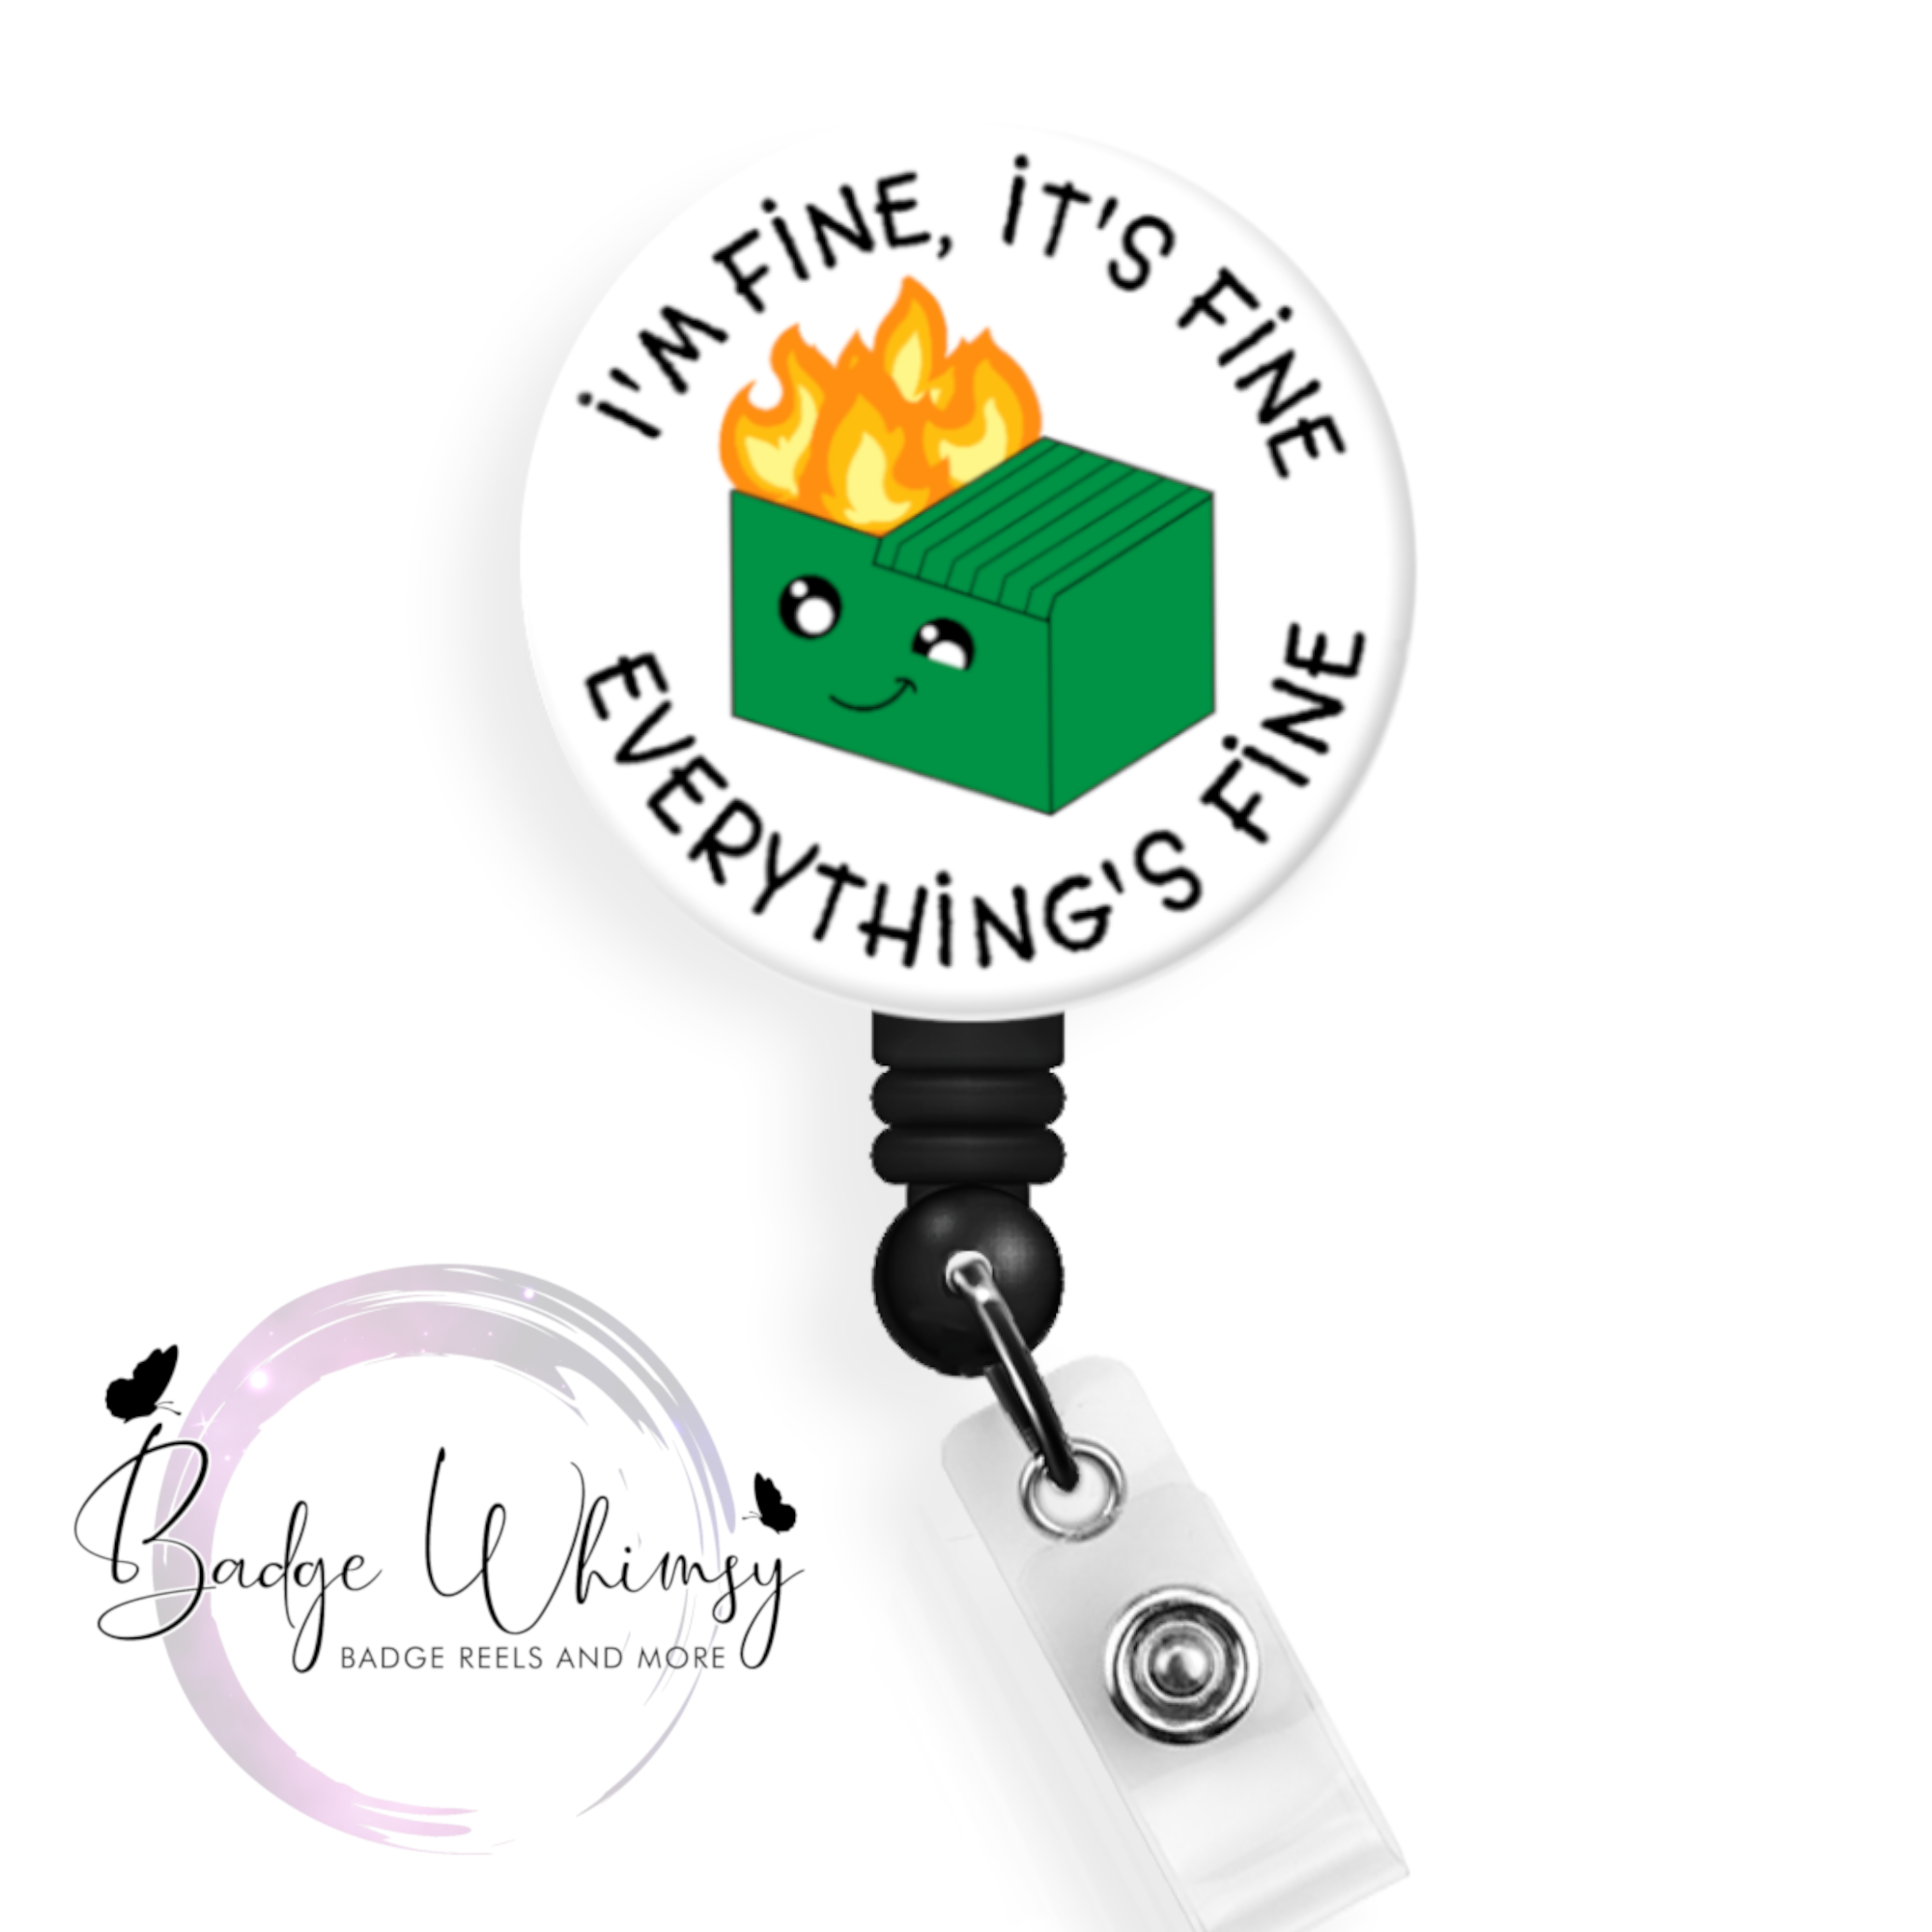 I'm Fine, It's Fine - Everything's Fine - Dumpster Fire - Pin, Magnet